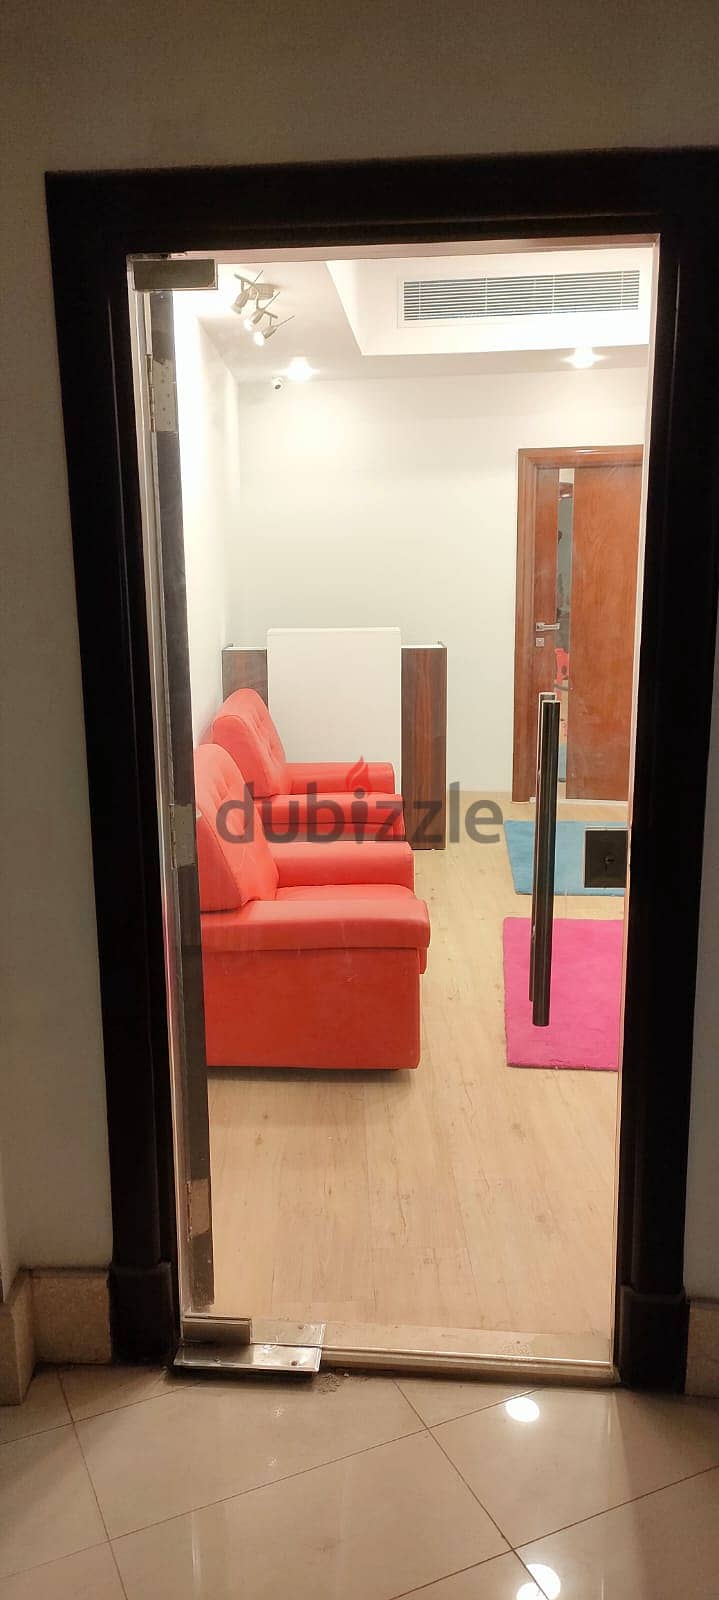 Clinic for rent fully finished + AC and furnished, on main street in heart of Sheikh Zayed 3